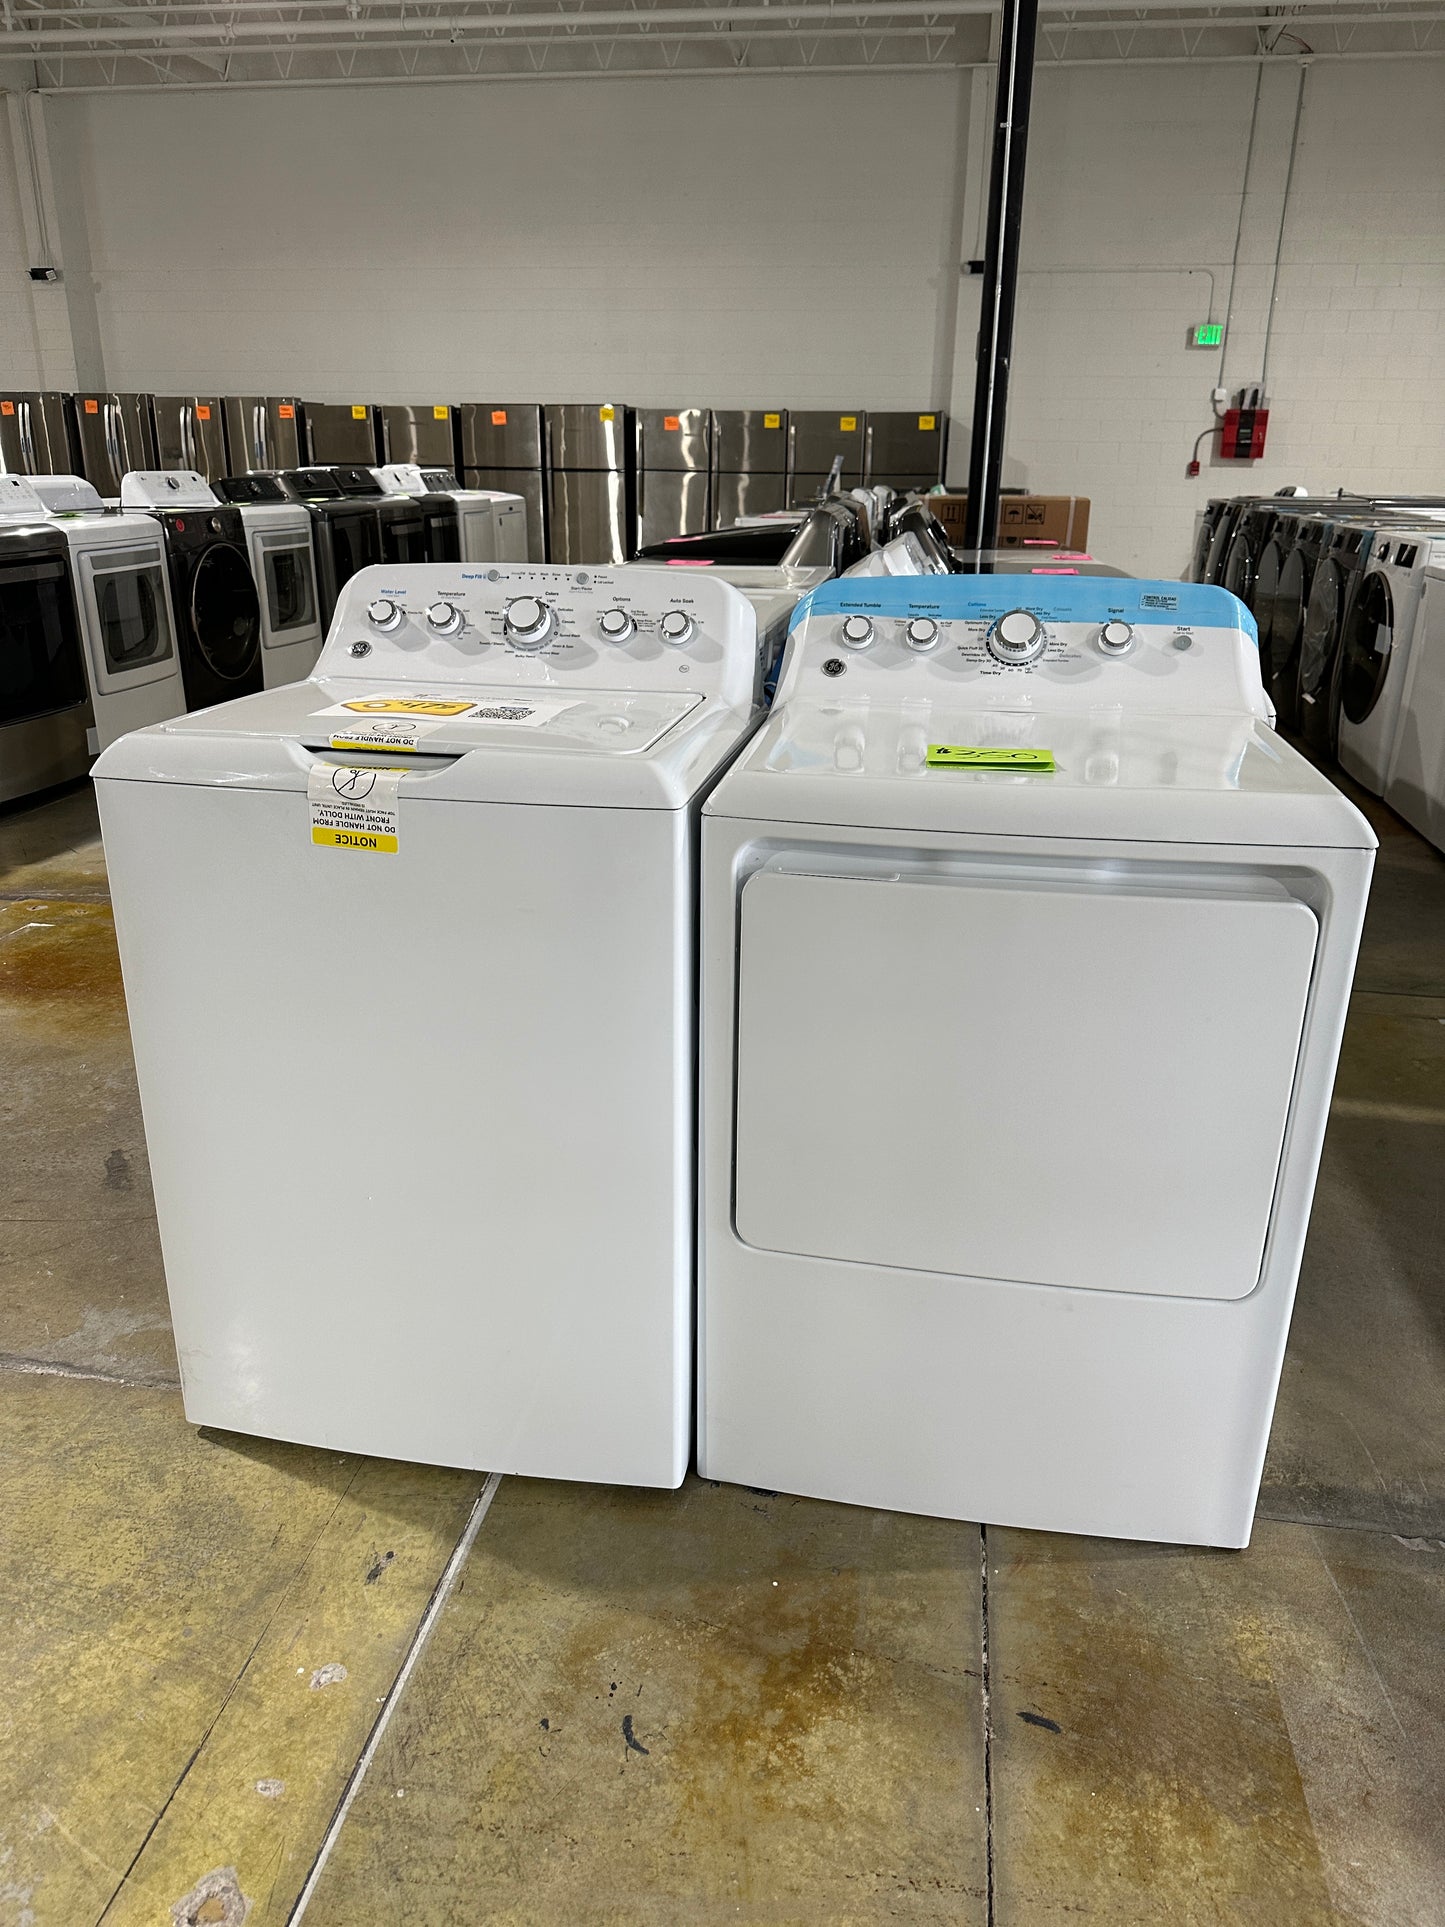 TOP LOAD WASHER GAS DRYER GE LAUNDRY SET - WAS11846s